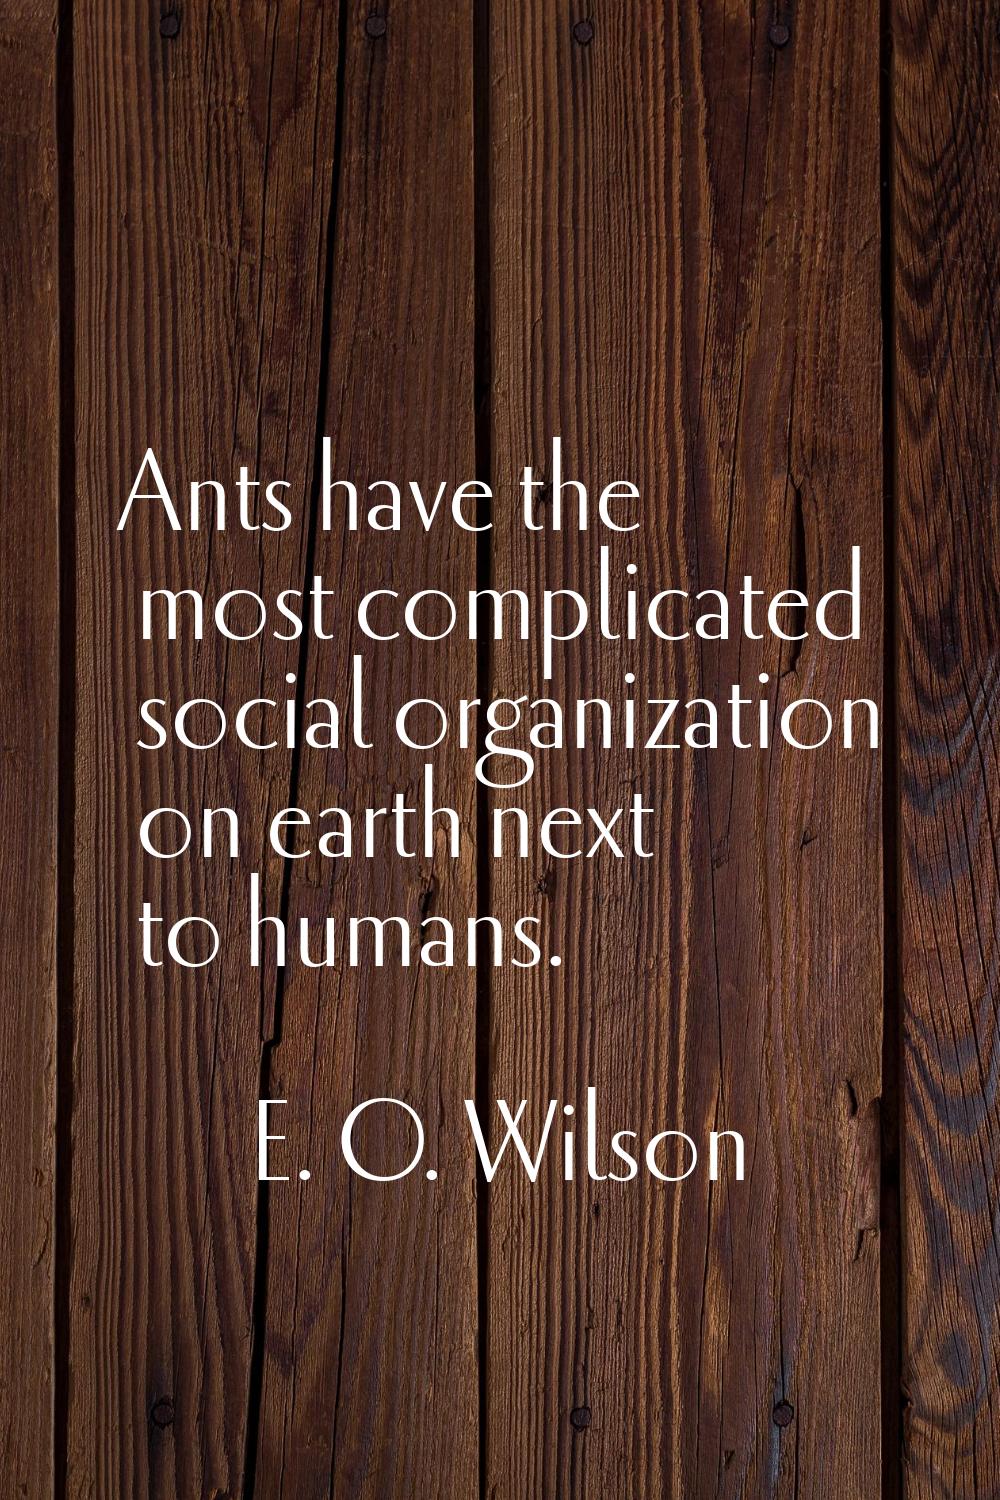 Ants have the most complicated social organization on earth next to humans.